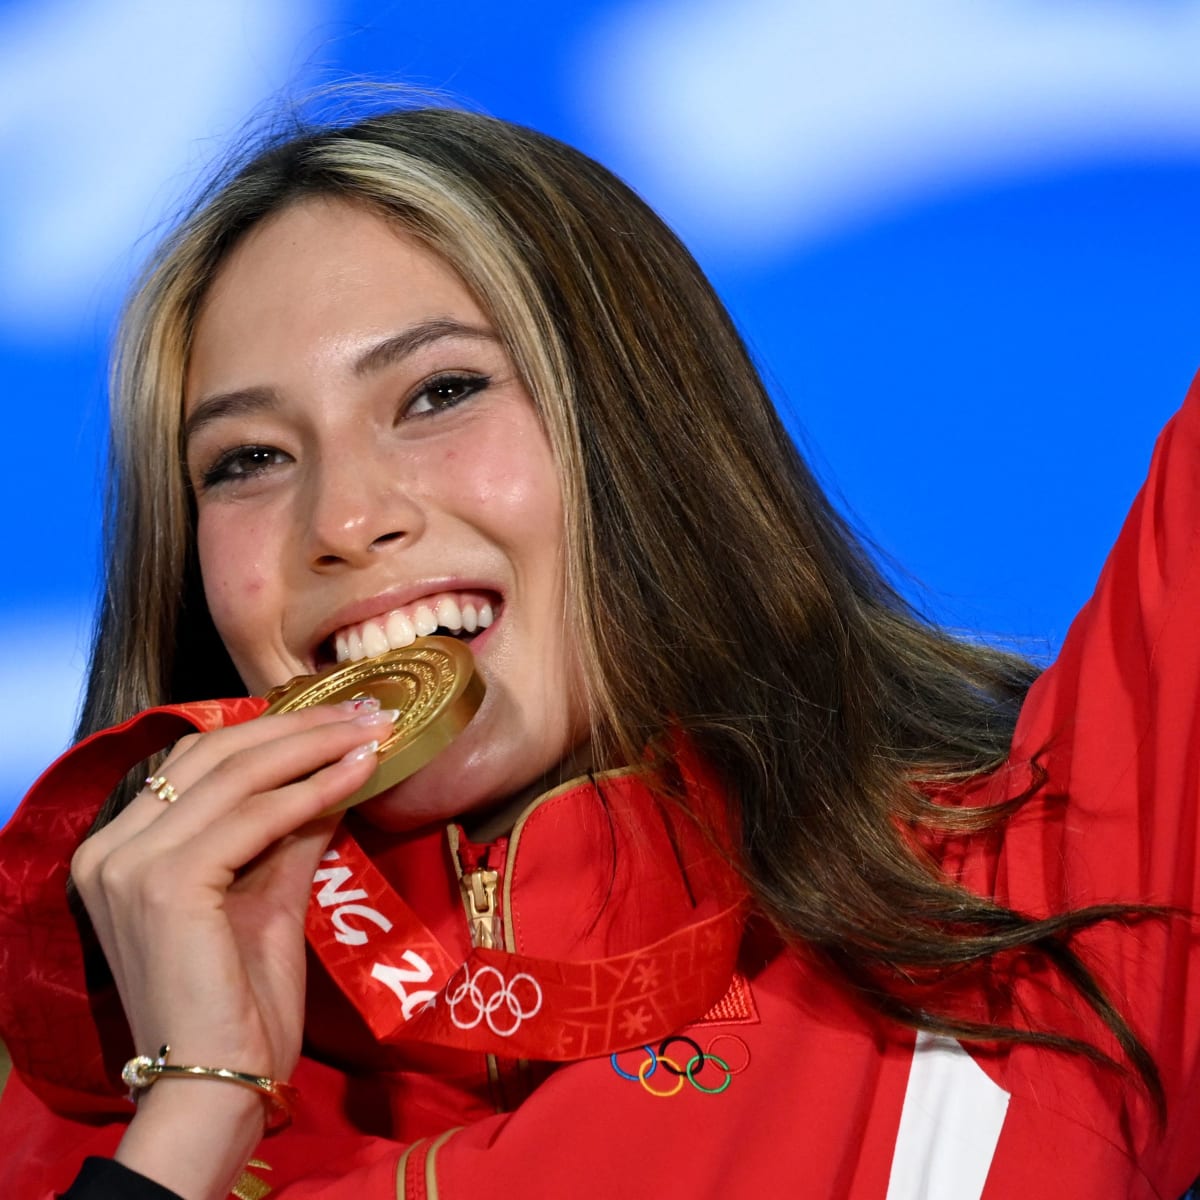 Look: 19-Year-Old Olympic Champion Going Viral Wednesday - The